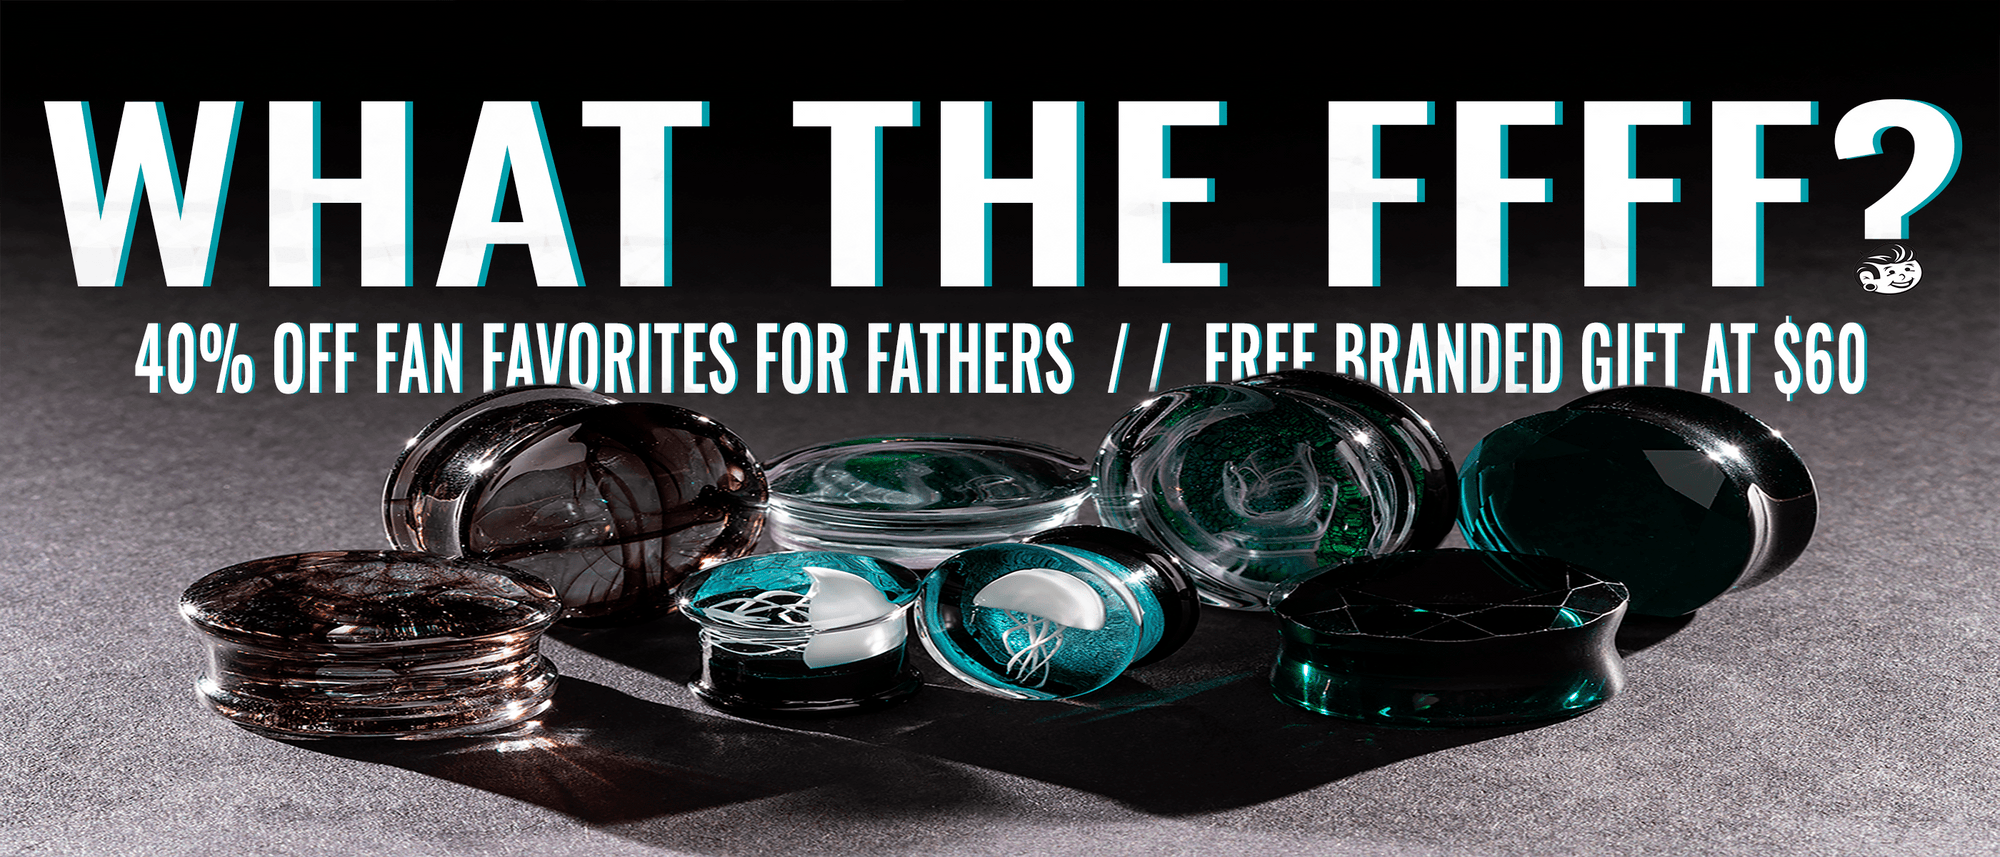 Fan Favorites for Fathers